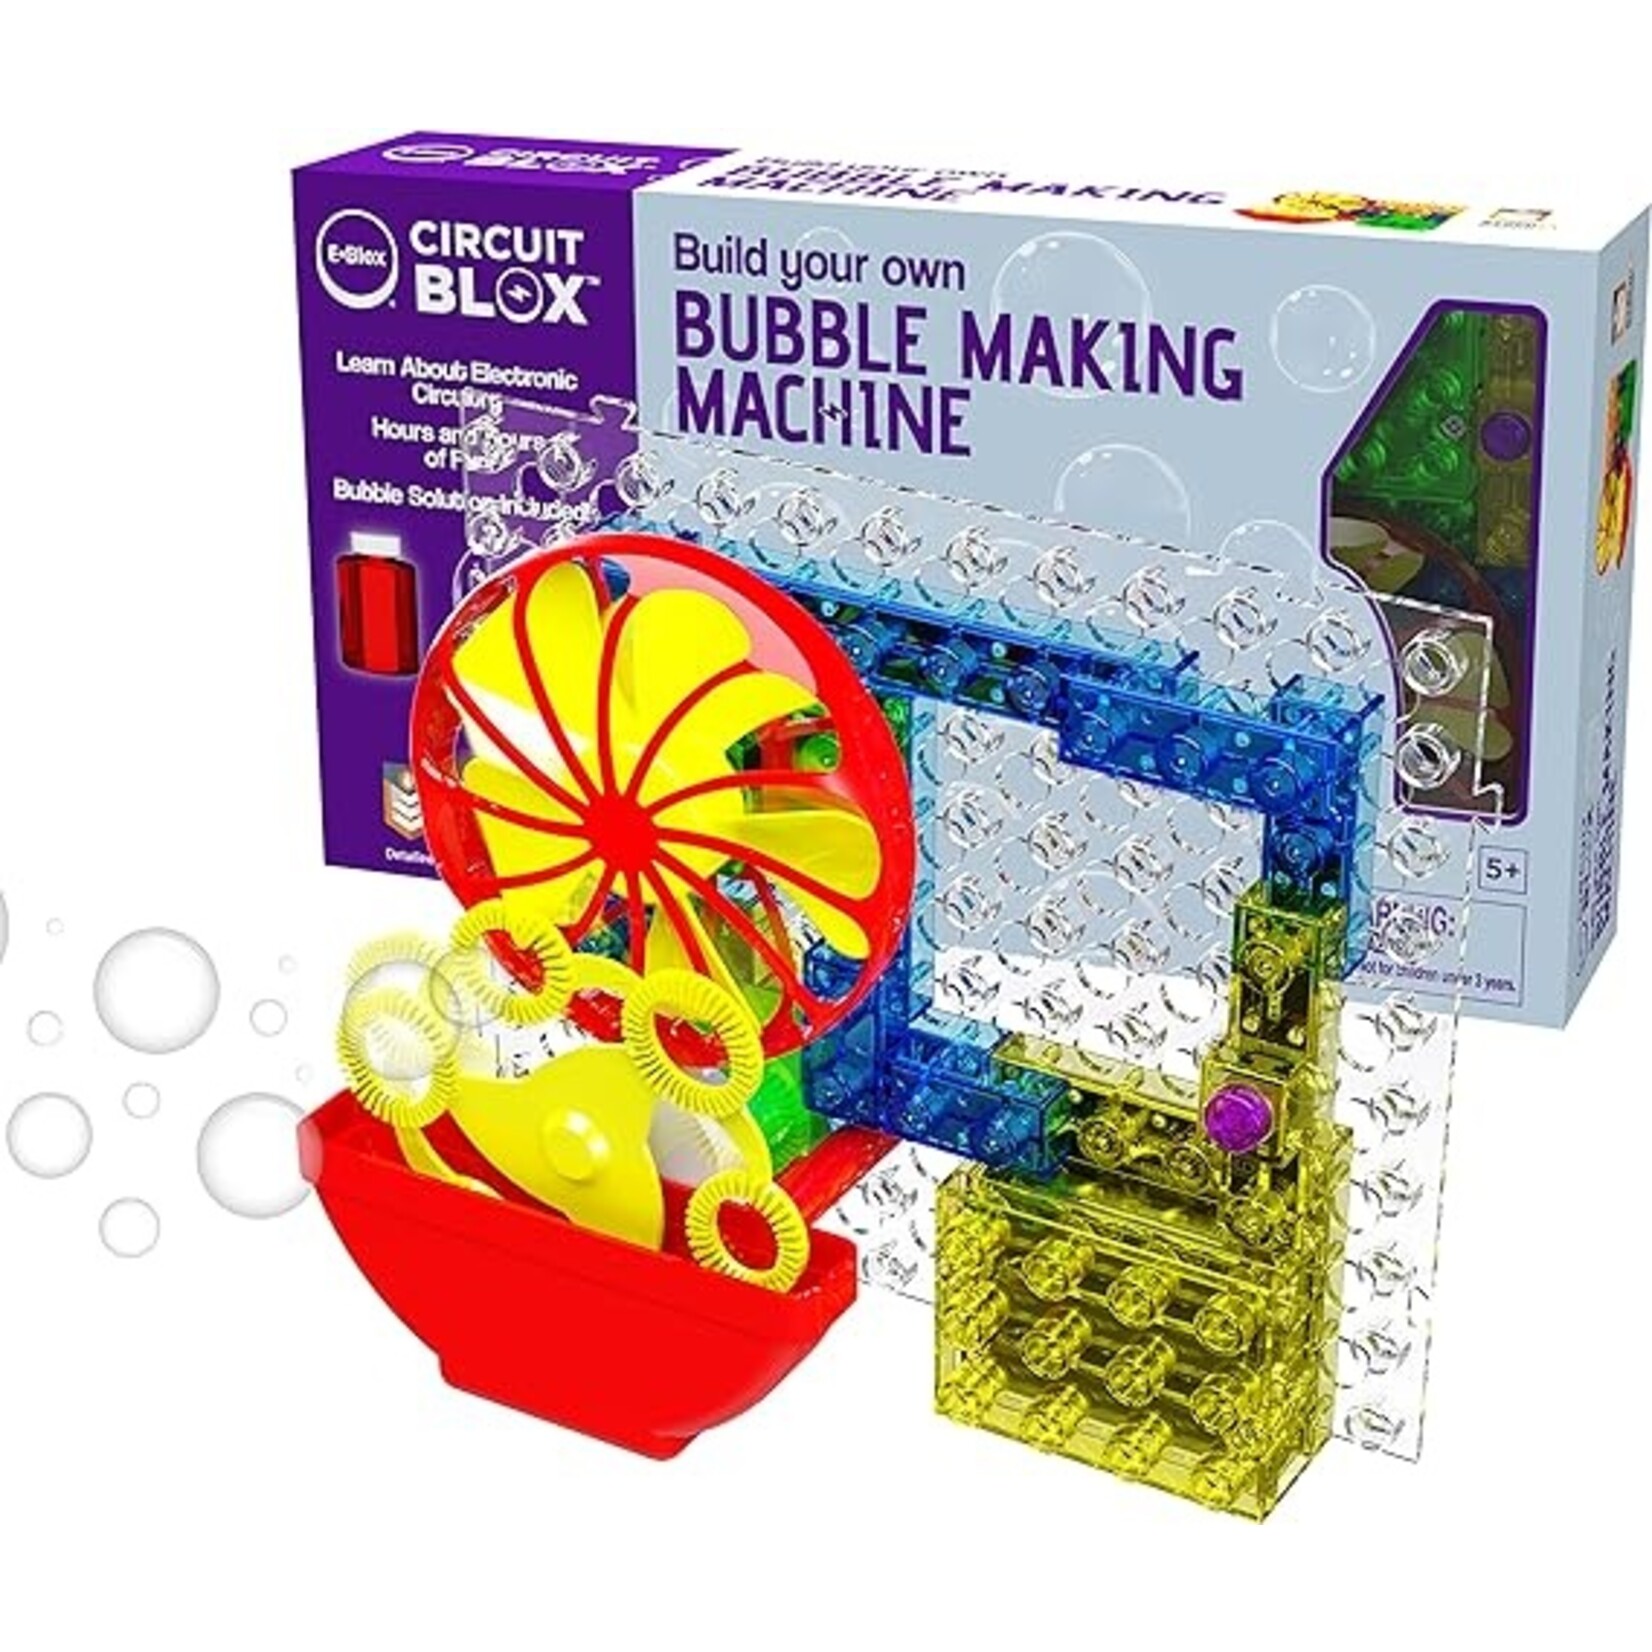 Build-Your-Own Bubble Making Machine